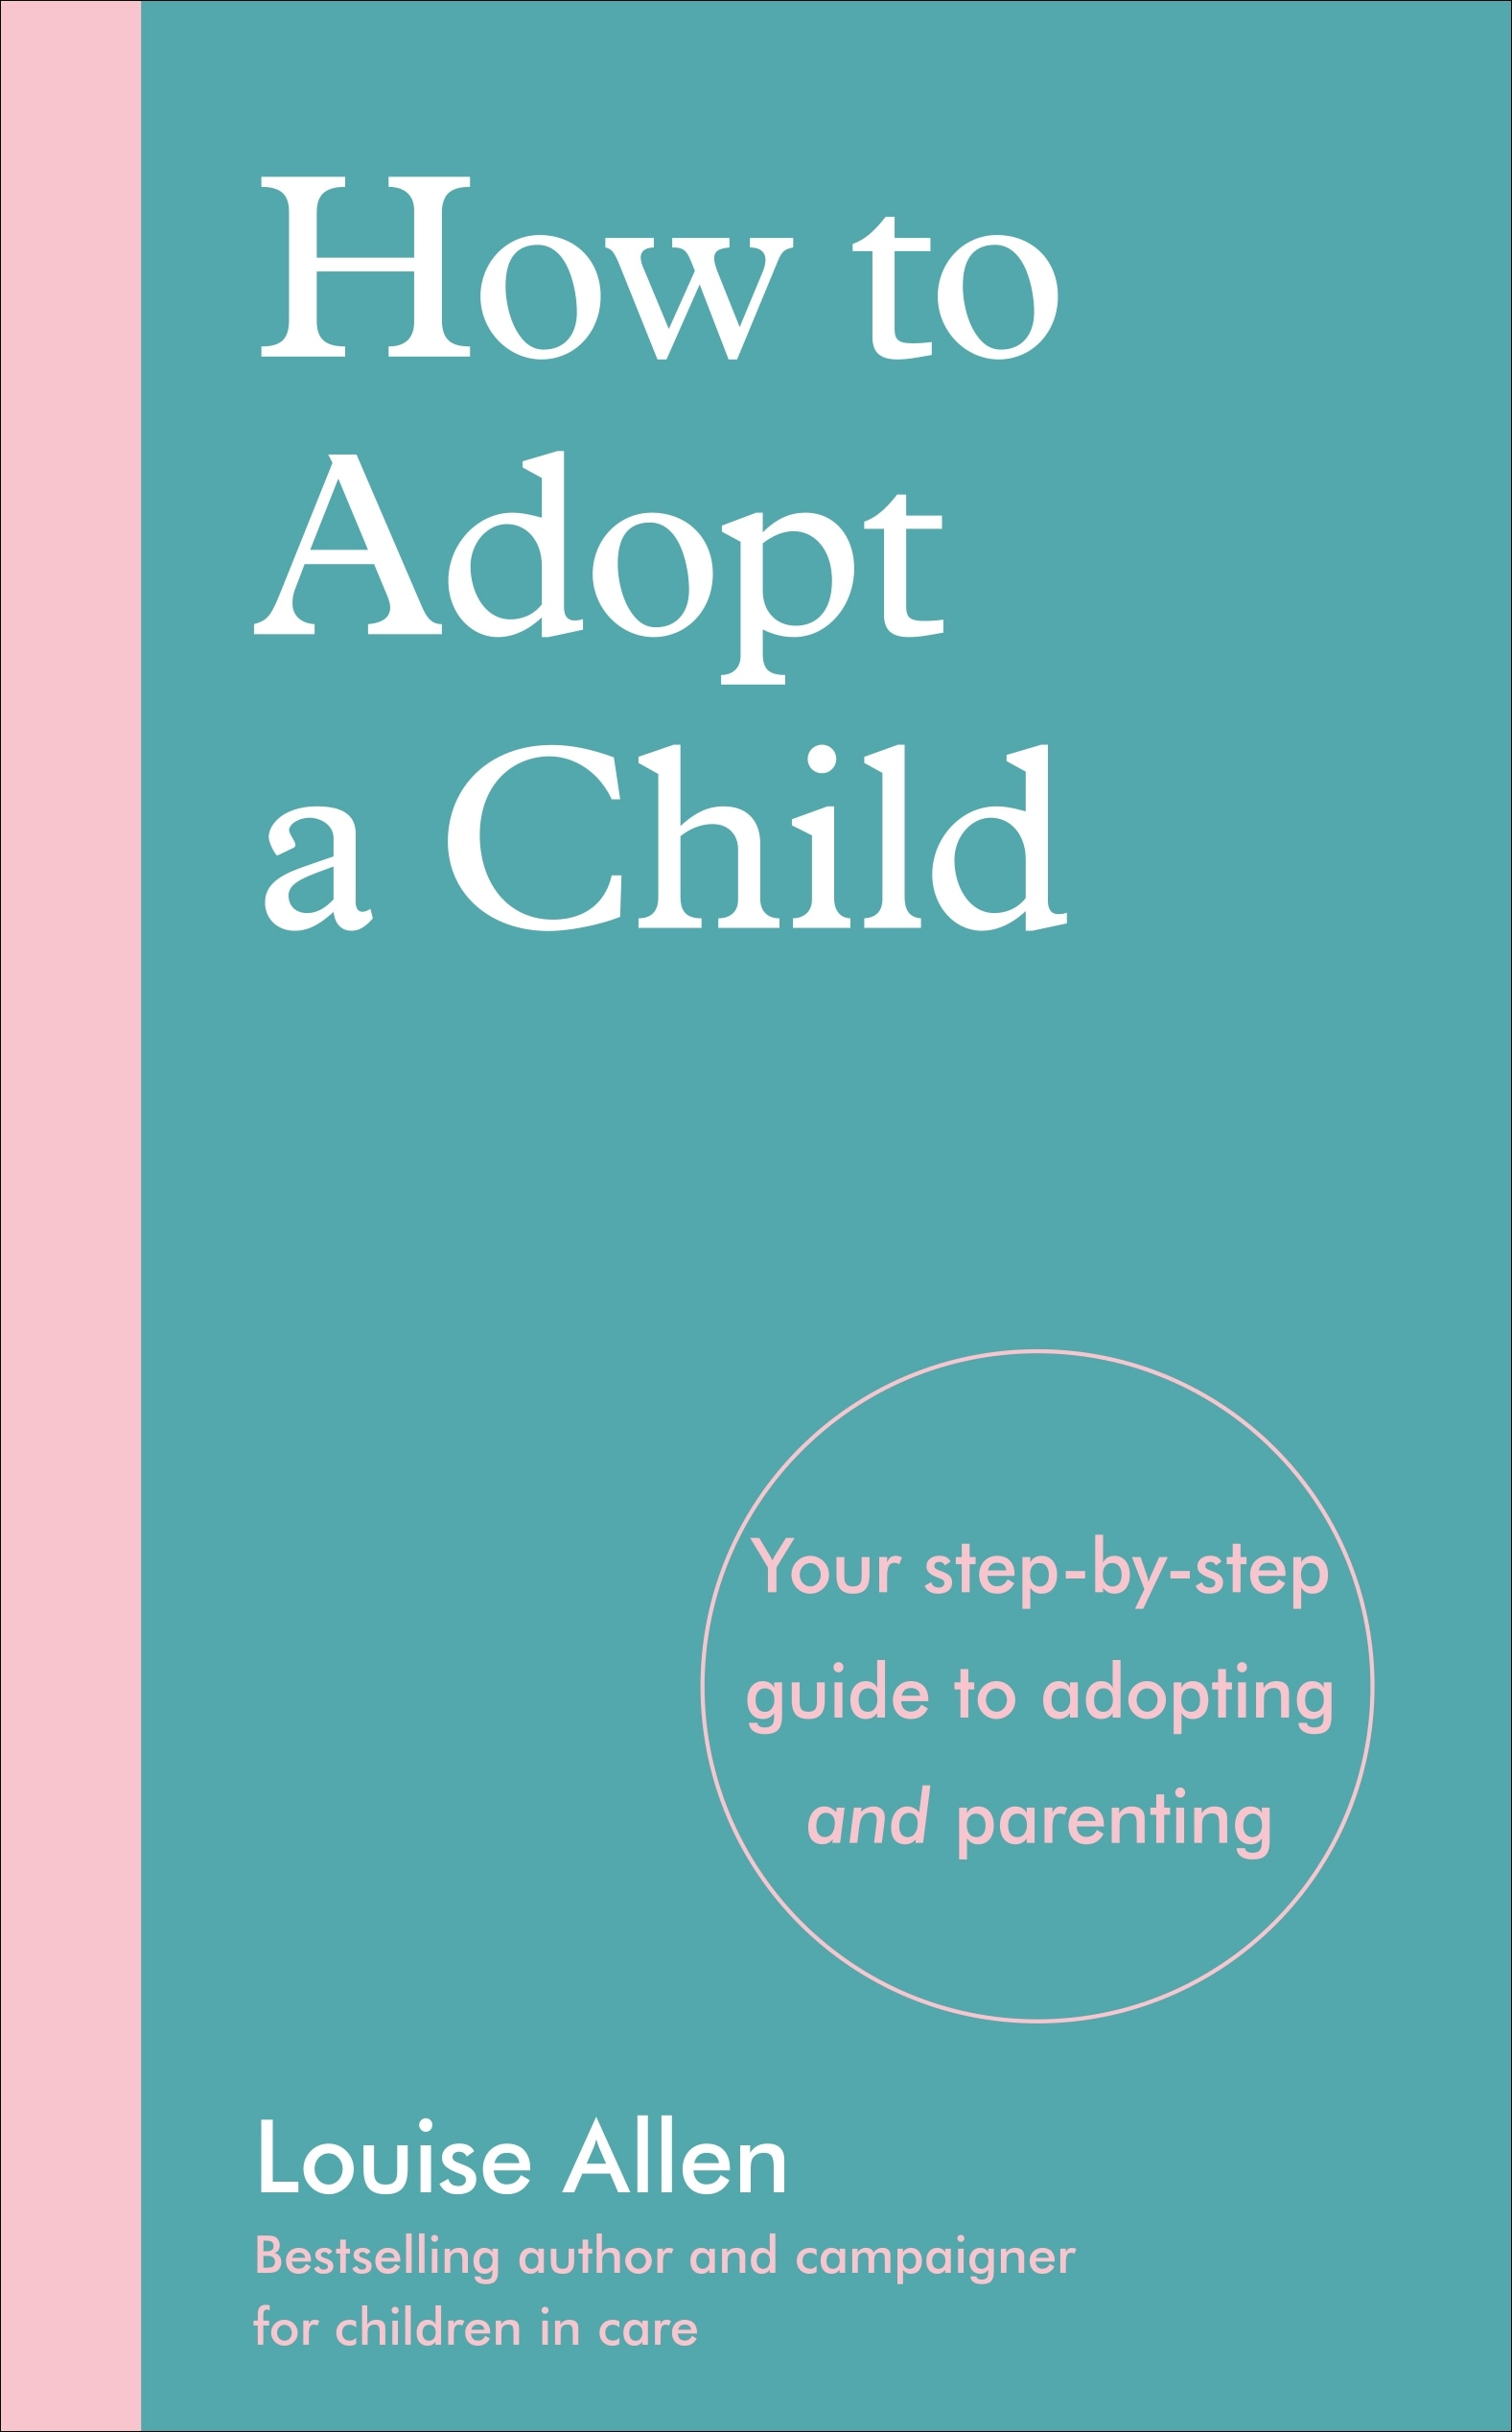 Book “How to Adopt a Child” by Louise Allen — April 22, 2021